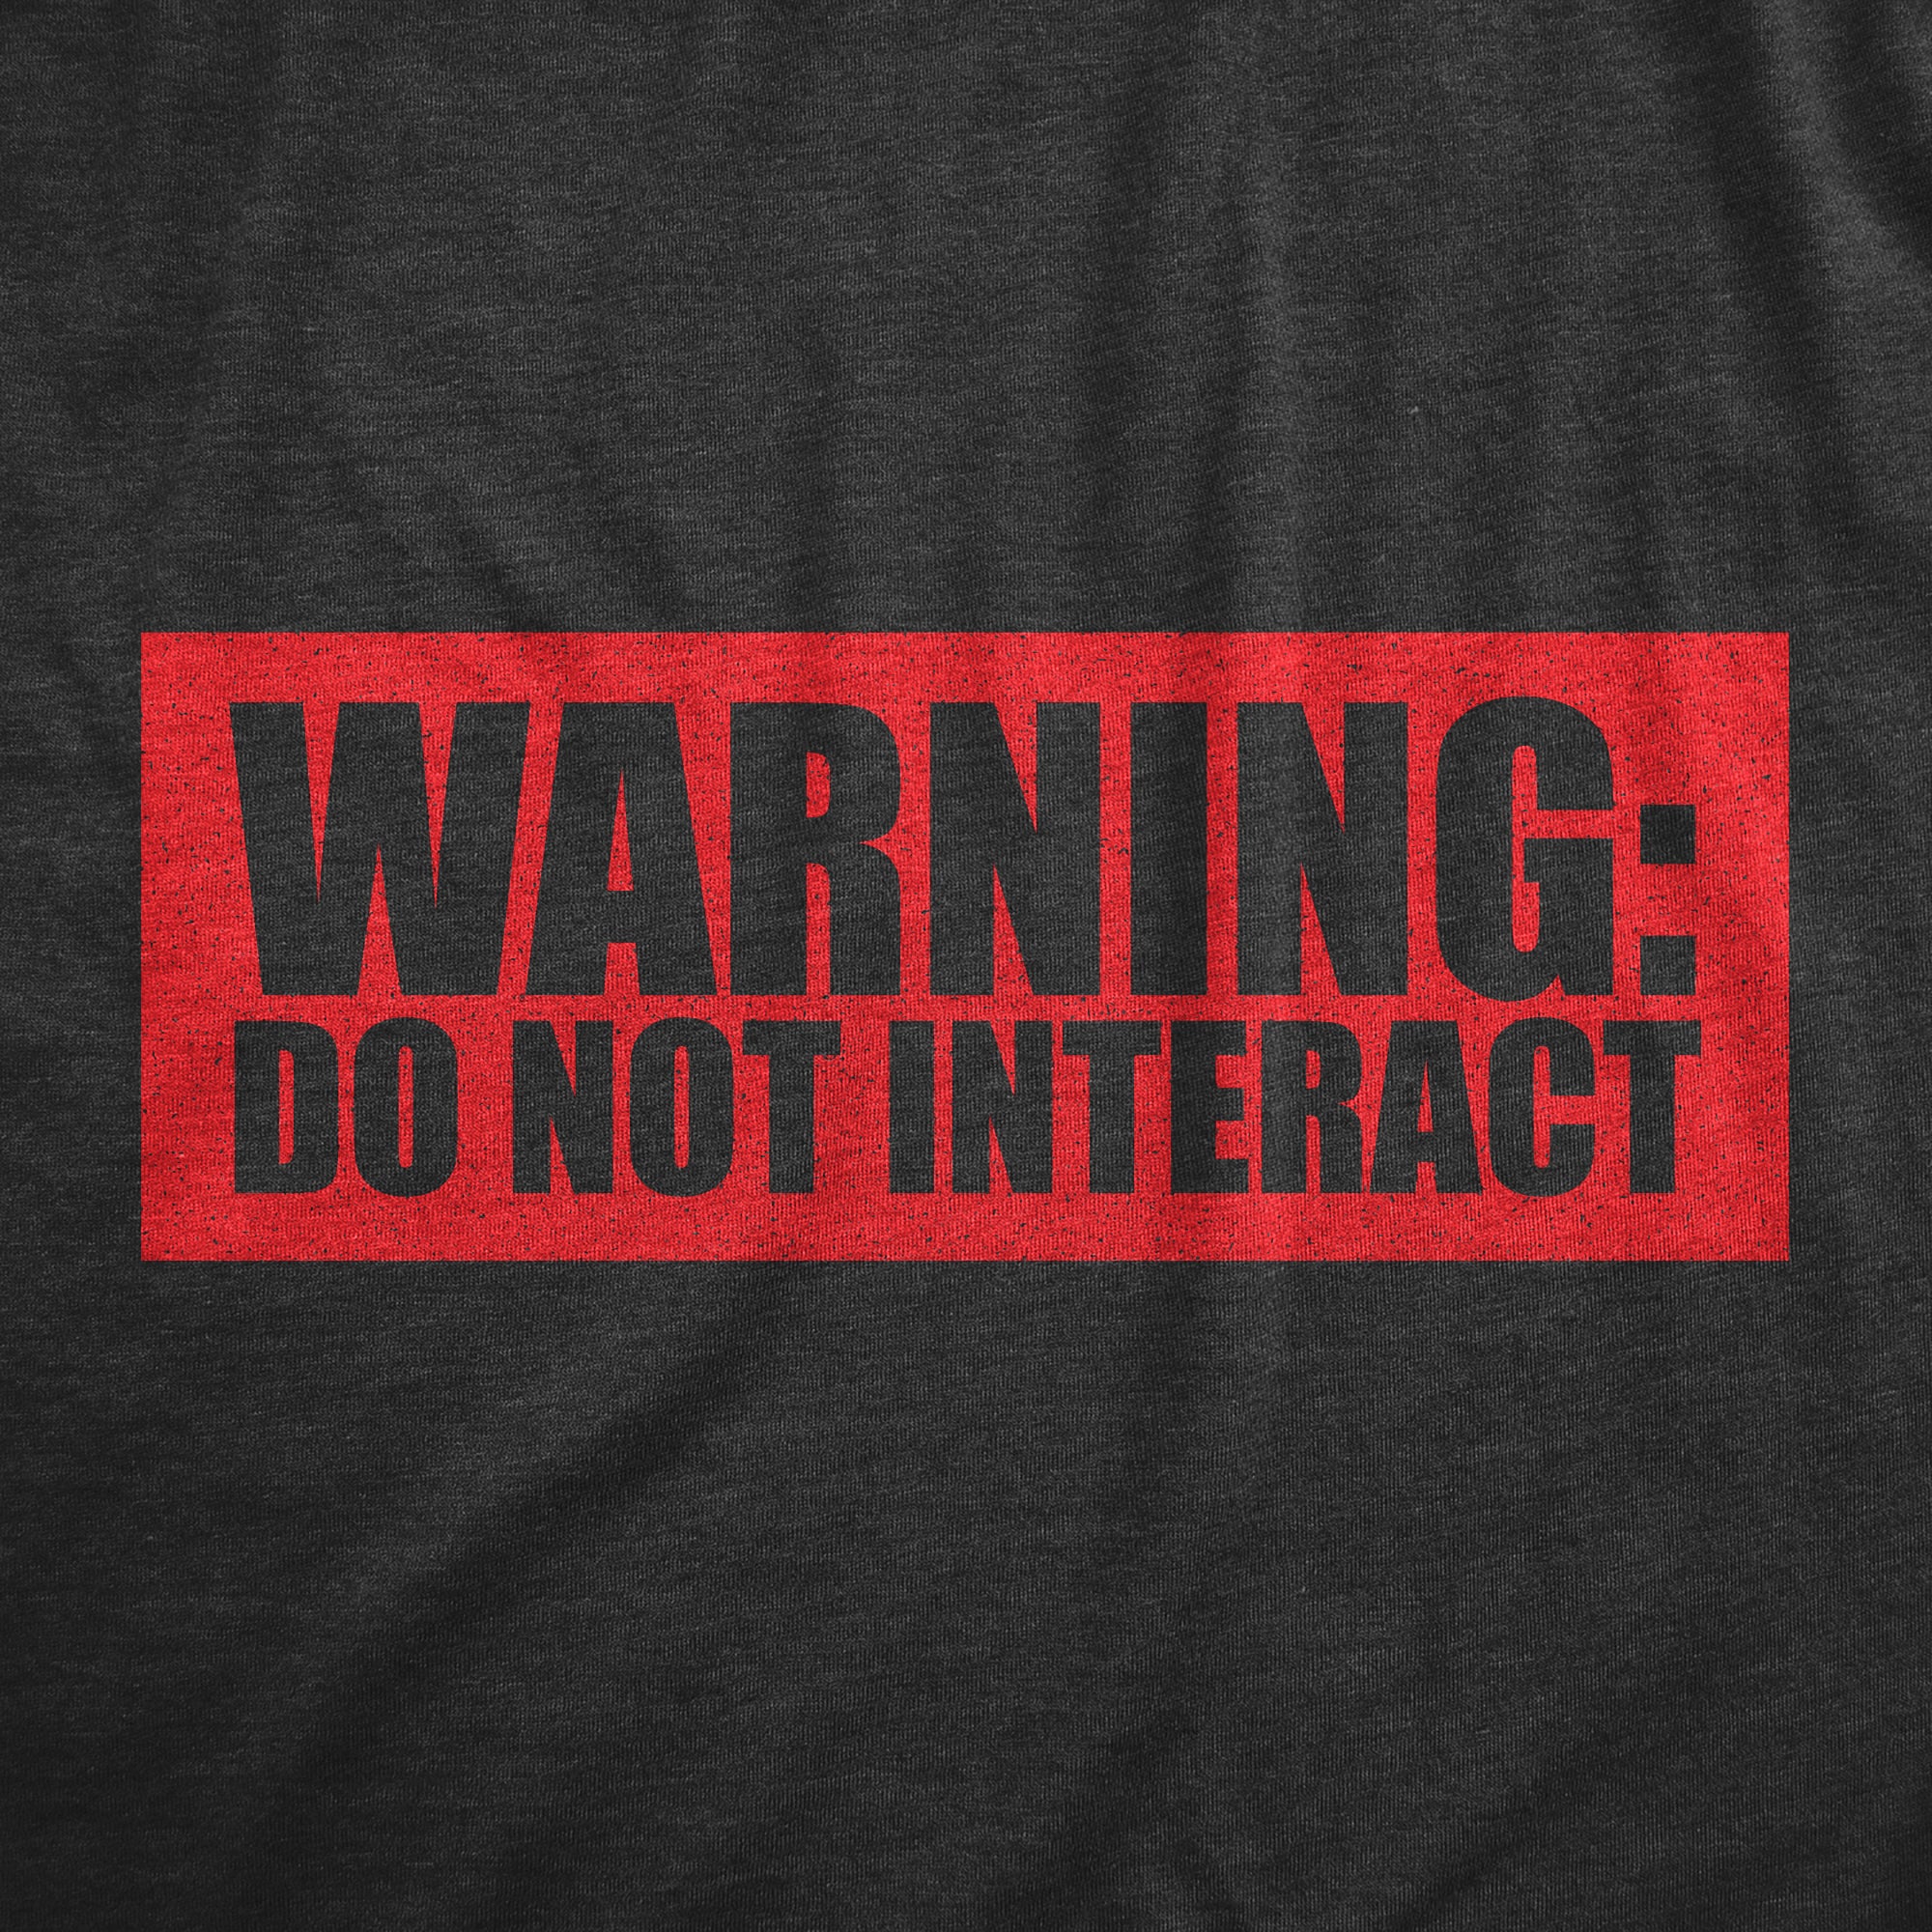 Funny Heather Black - WARNING Warning Do Not Interact Womens T Shirt Nerdy Introvert Sarcastic Tee